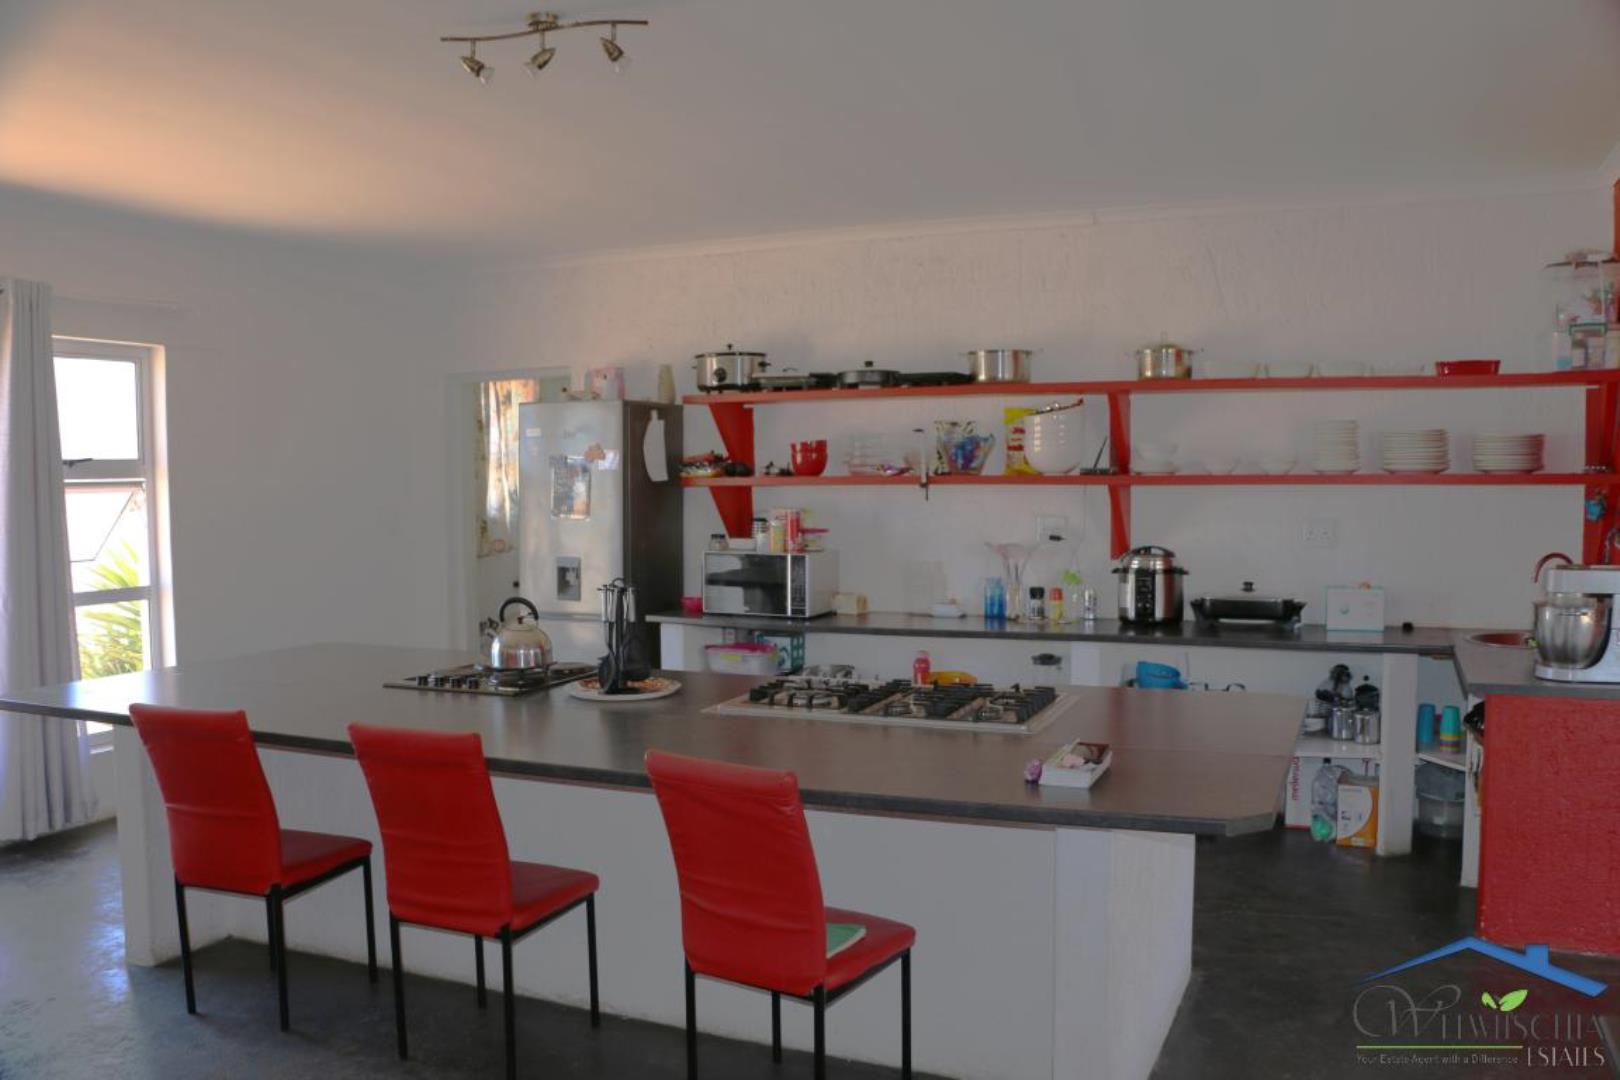 Guesthouse for Sale - Erongo